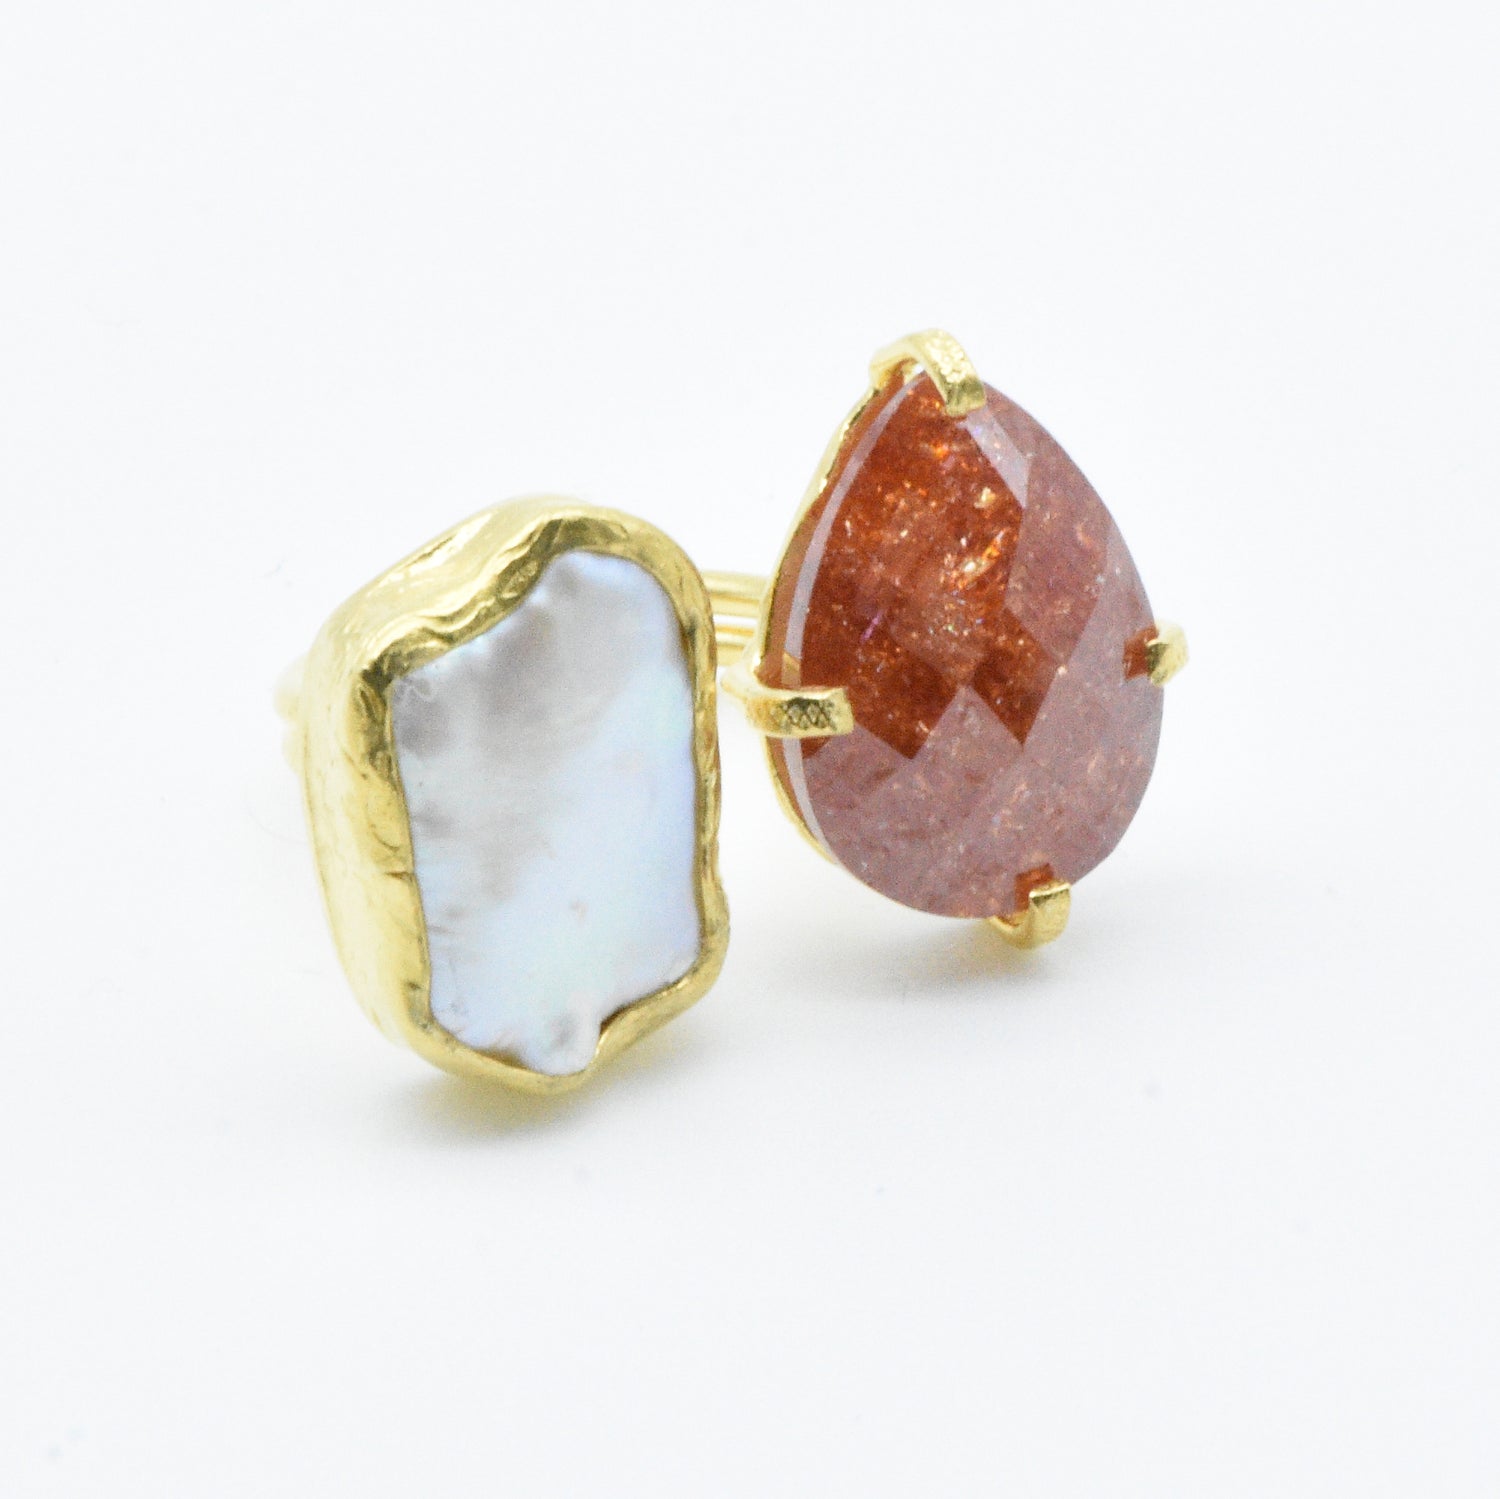 Aylas Pearl ans Crackled Zircon Ring - 21ct Gold plated semi precious gemstone - Handmade in Ottoman Style by Artisan